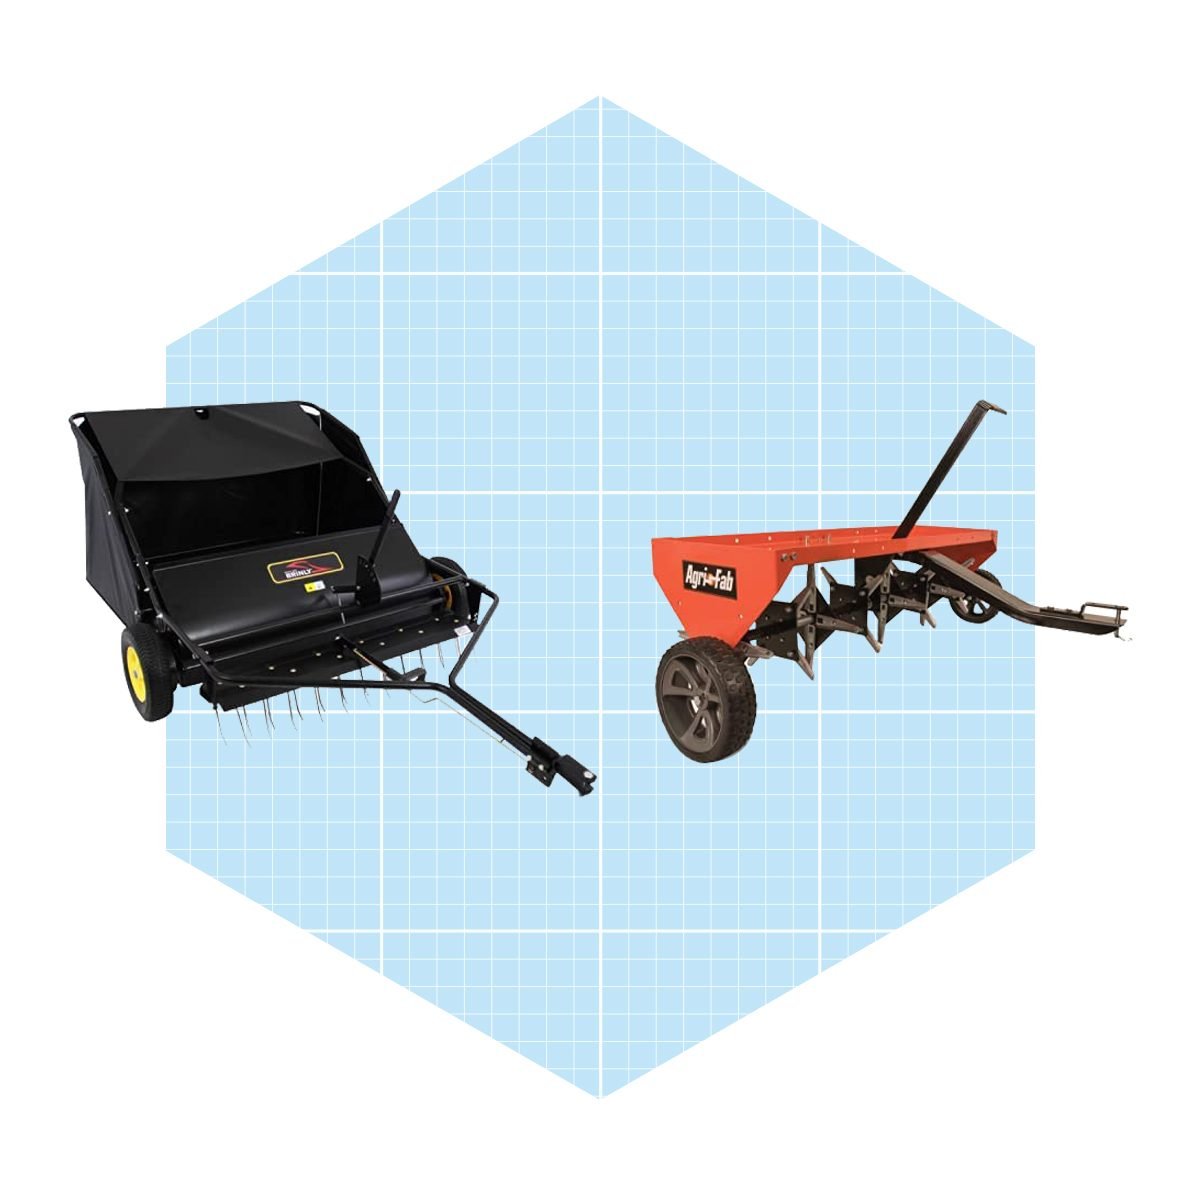 Brinly Tow Behind Lawn Sweeper With Dethatcher And Hamper Windscreen Ecomm Amazon.com